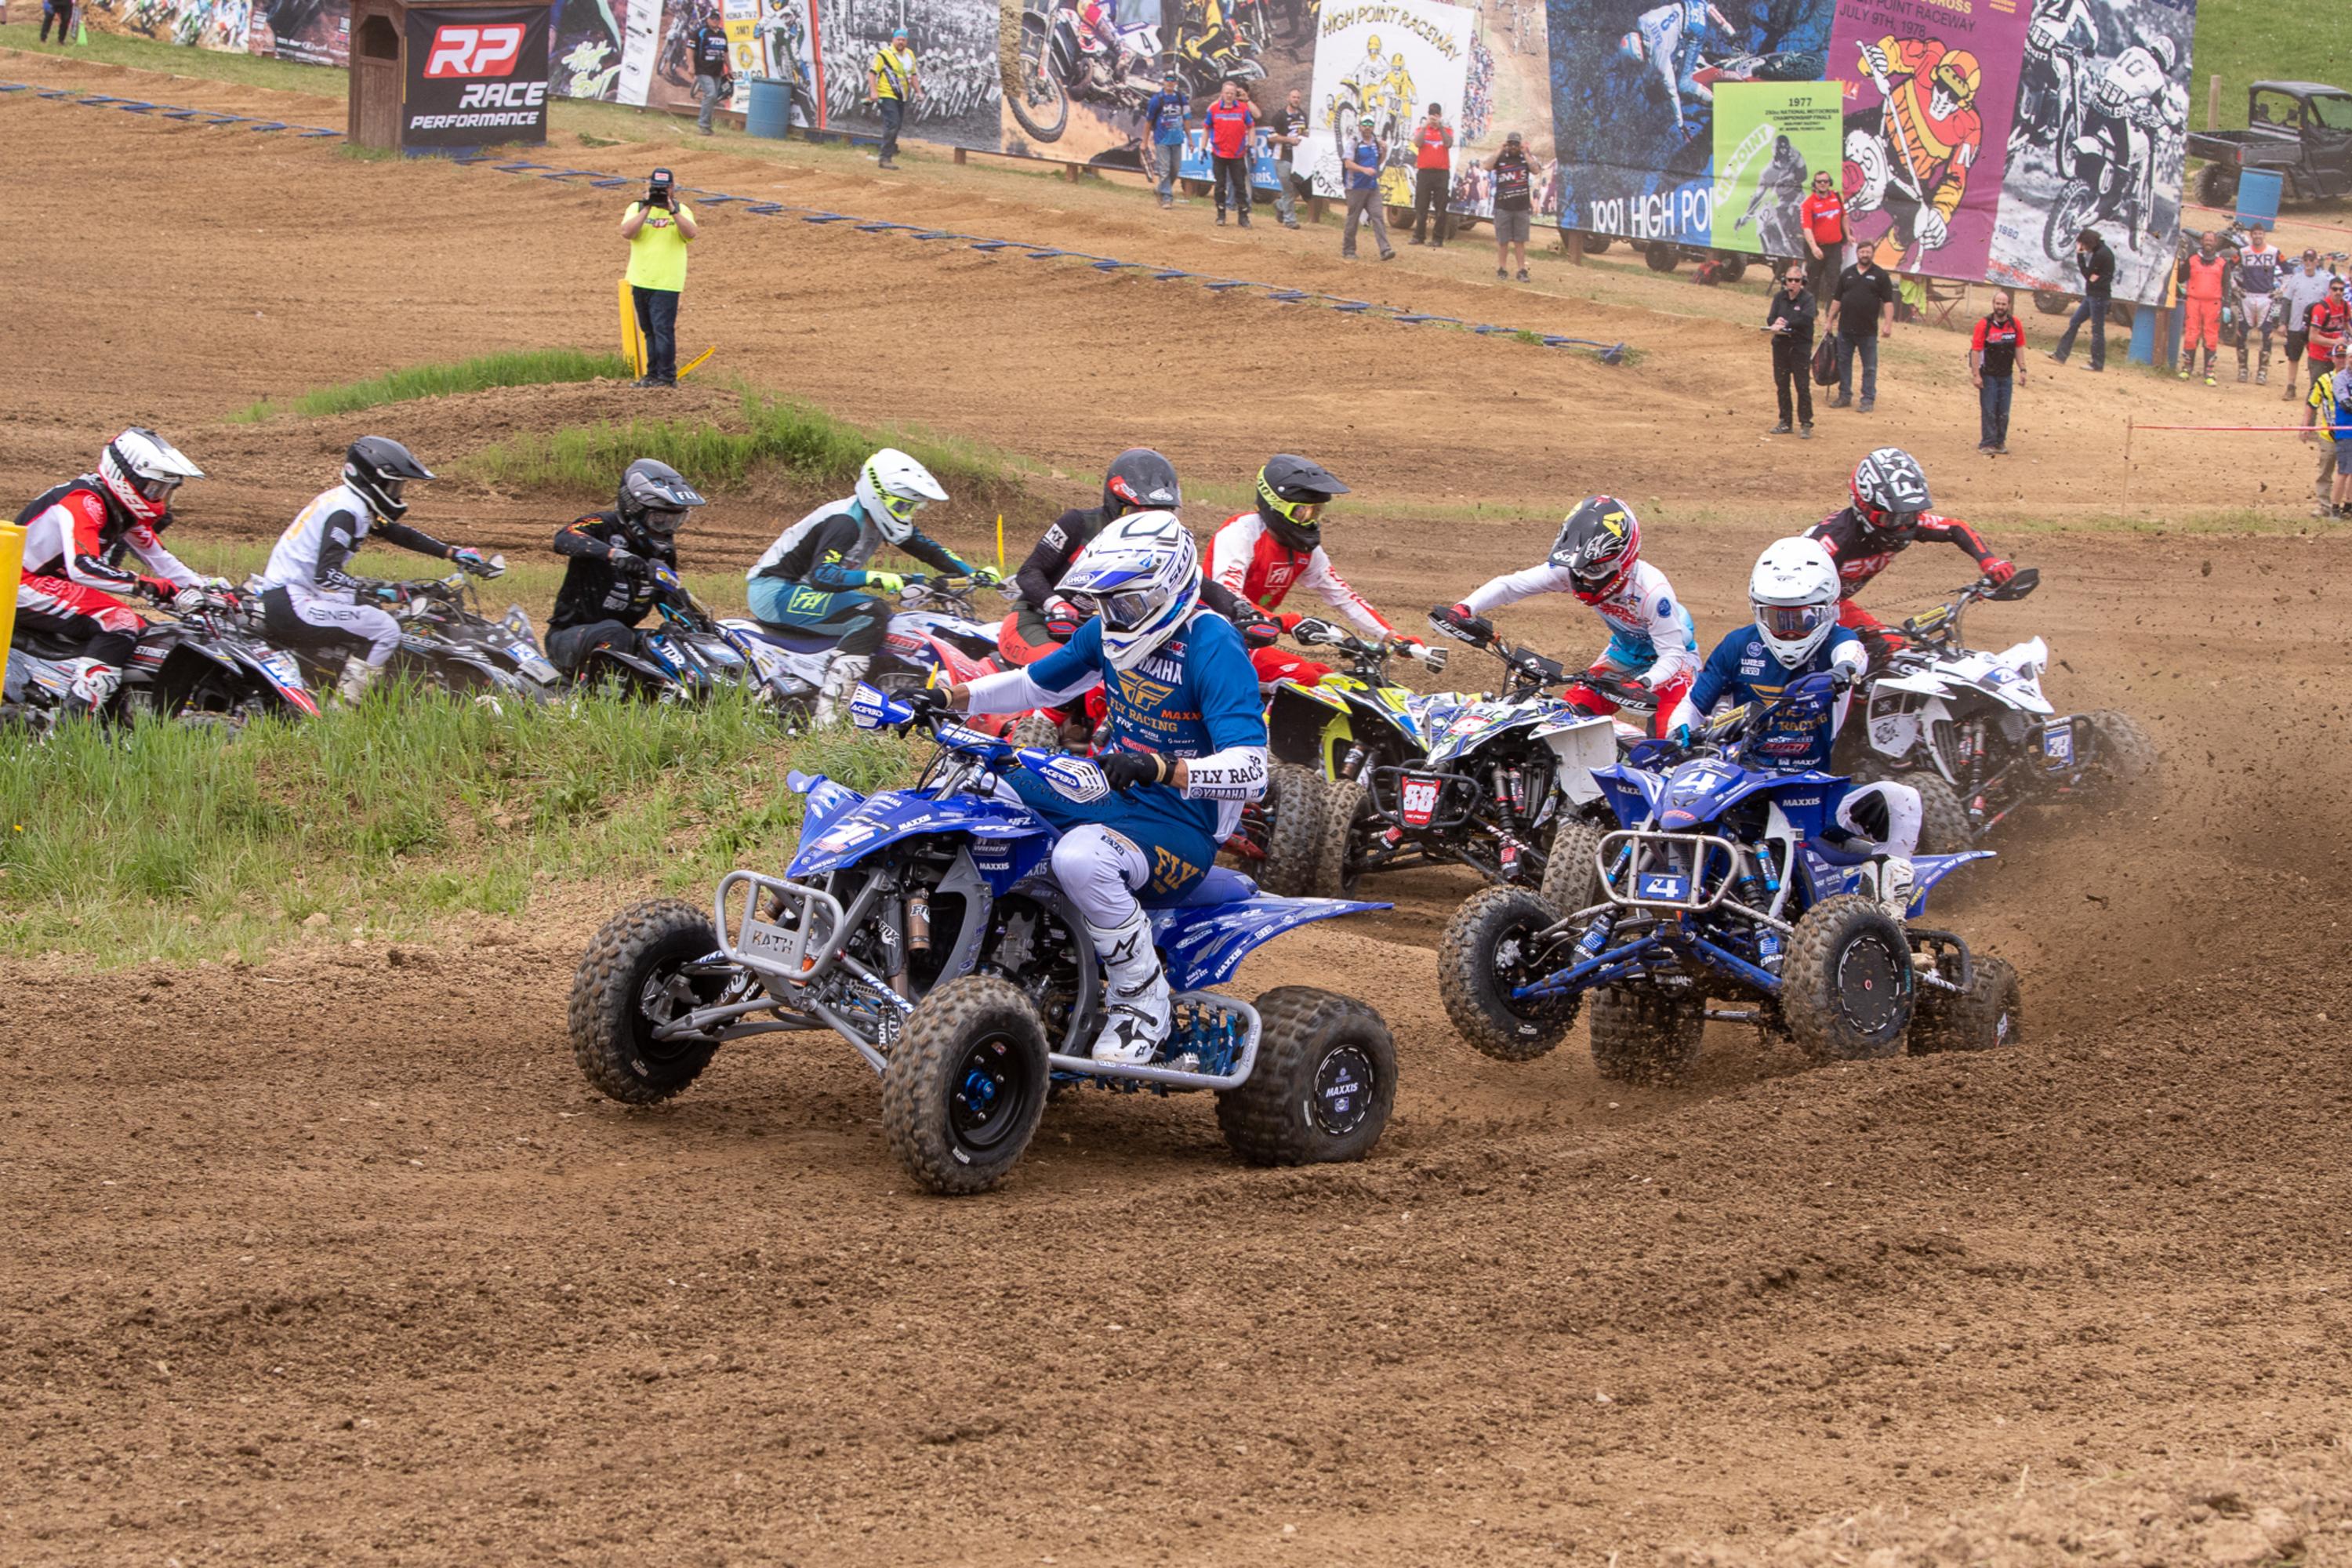 High Point ATVMX National Championship Race Report